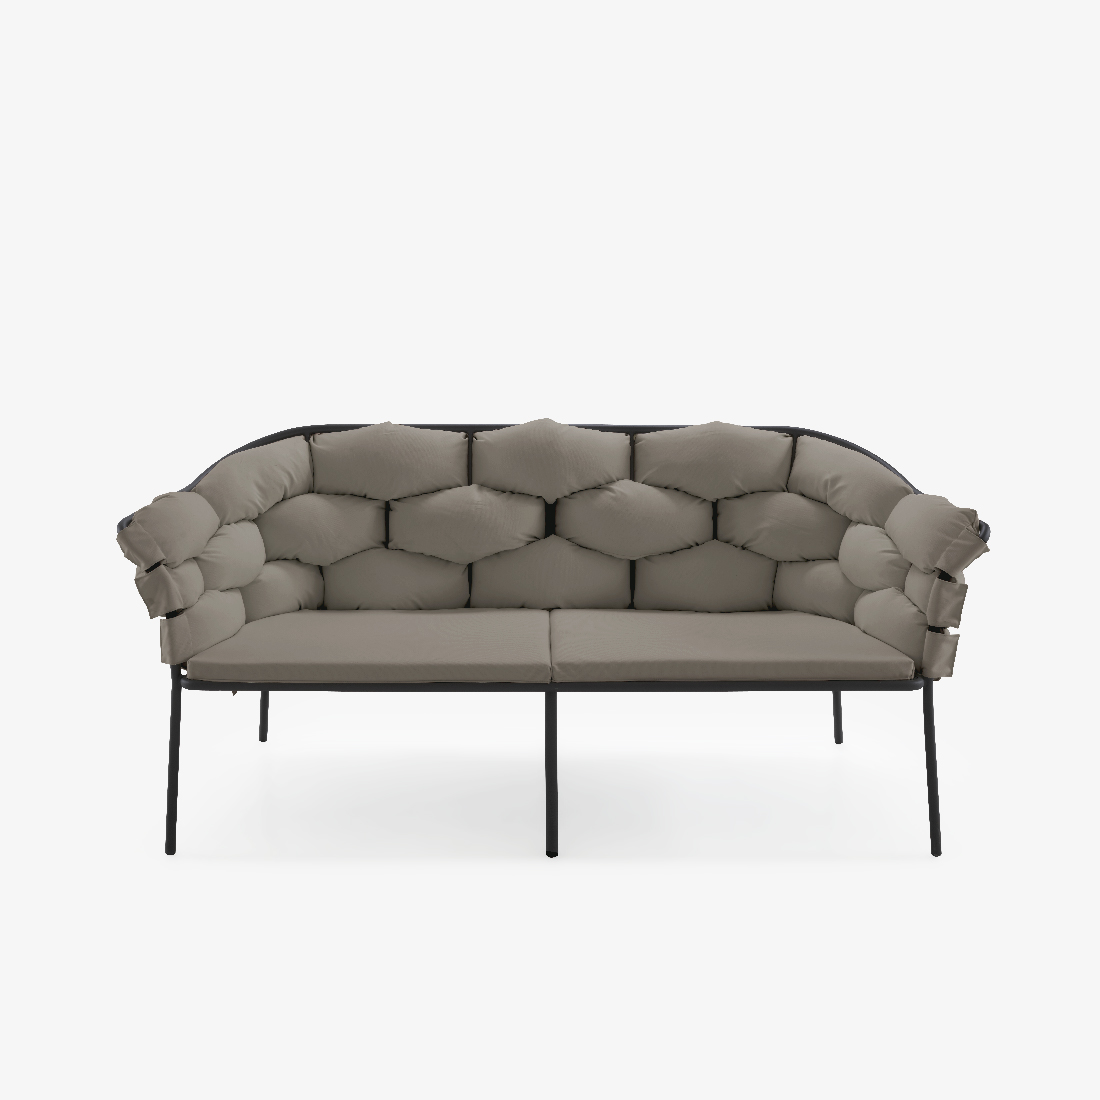 Image LOVESEAT TAUPE / CHARCOAL STRUCTURE 